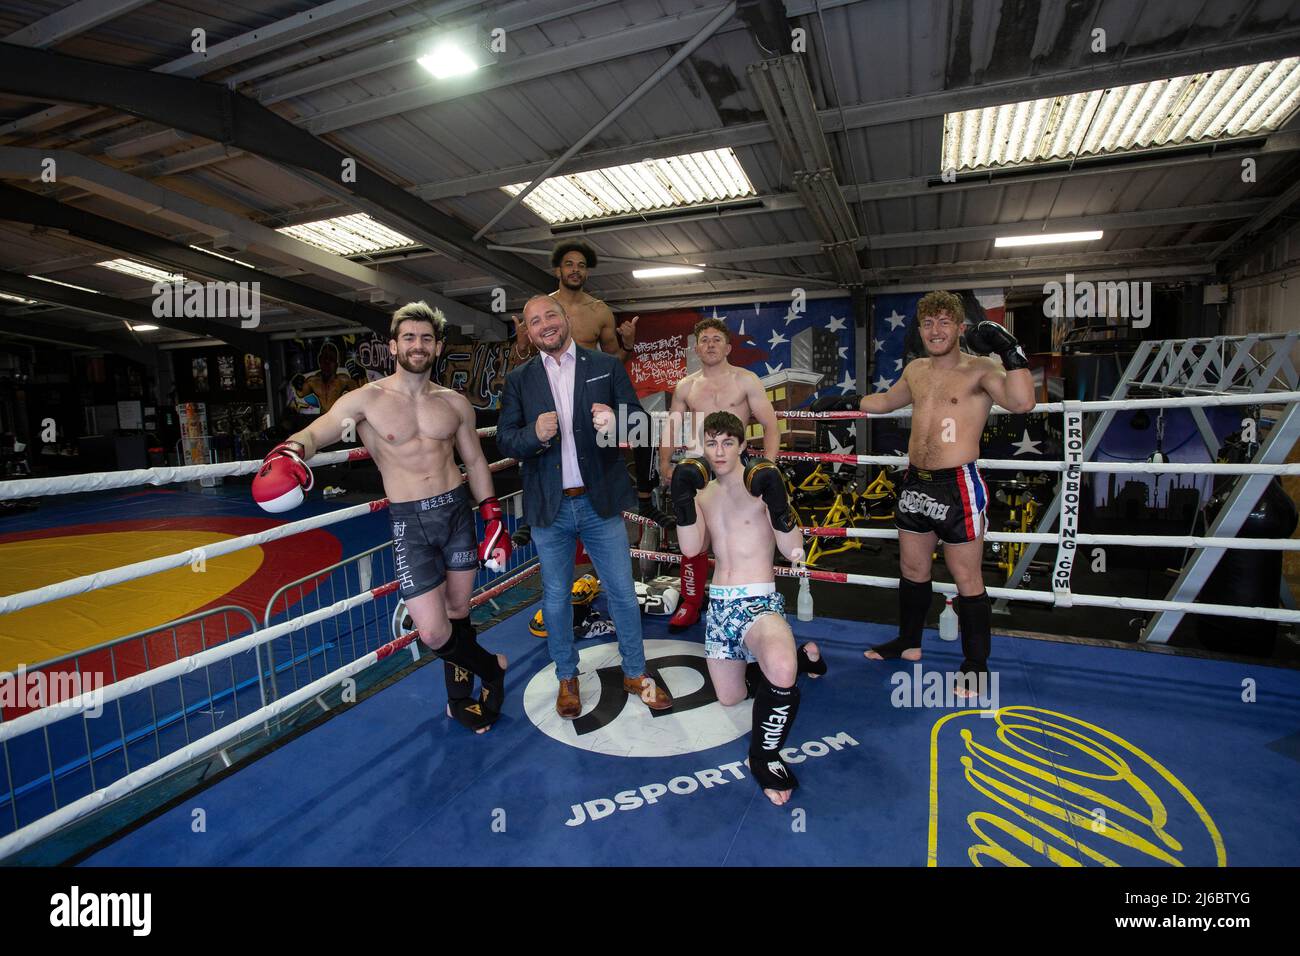 Businessman Chris Walsh Reform UK candidate and local gym owner of Trident Fitness posing  with students at boxing training, West Yorkshire,England . Stock Photo